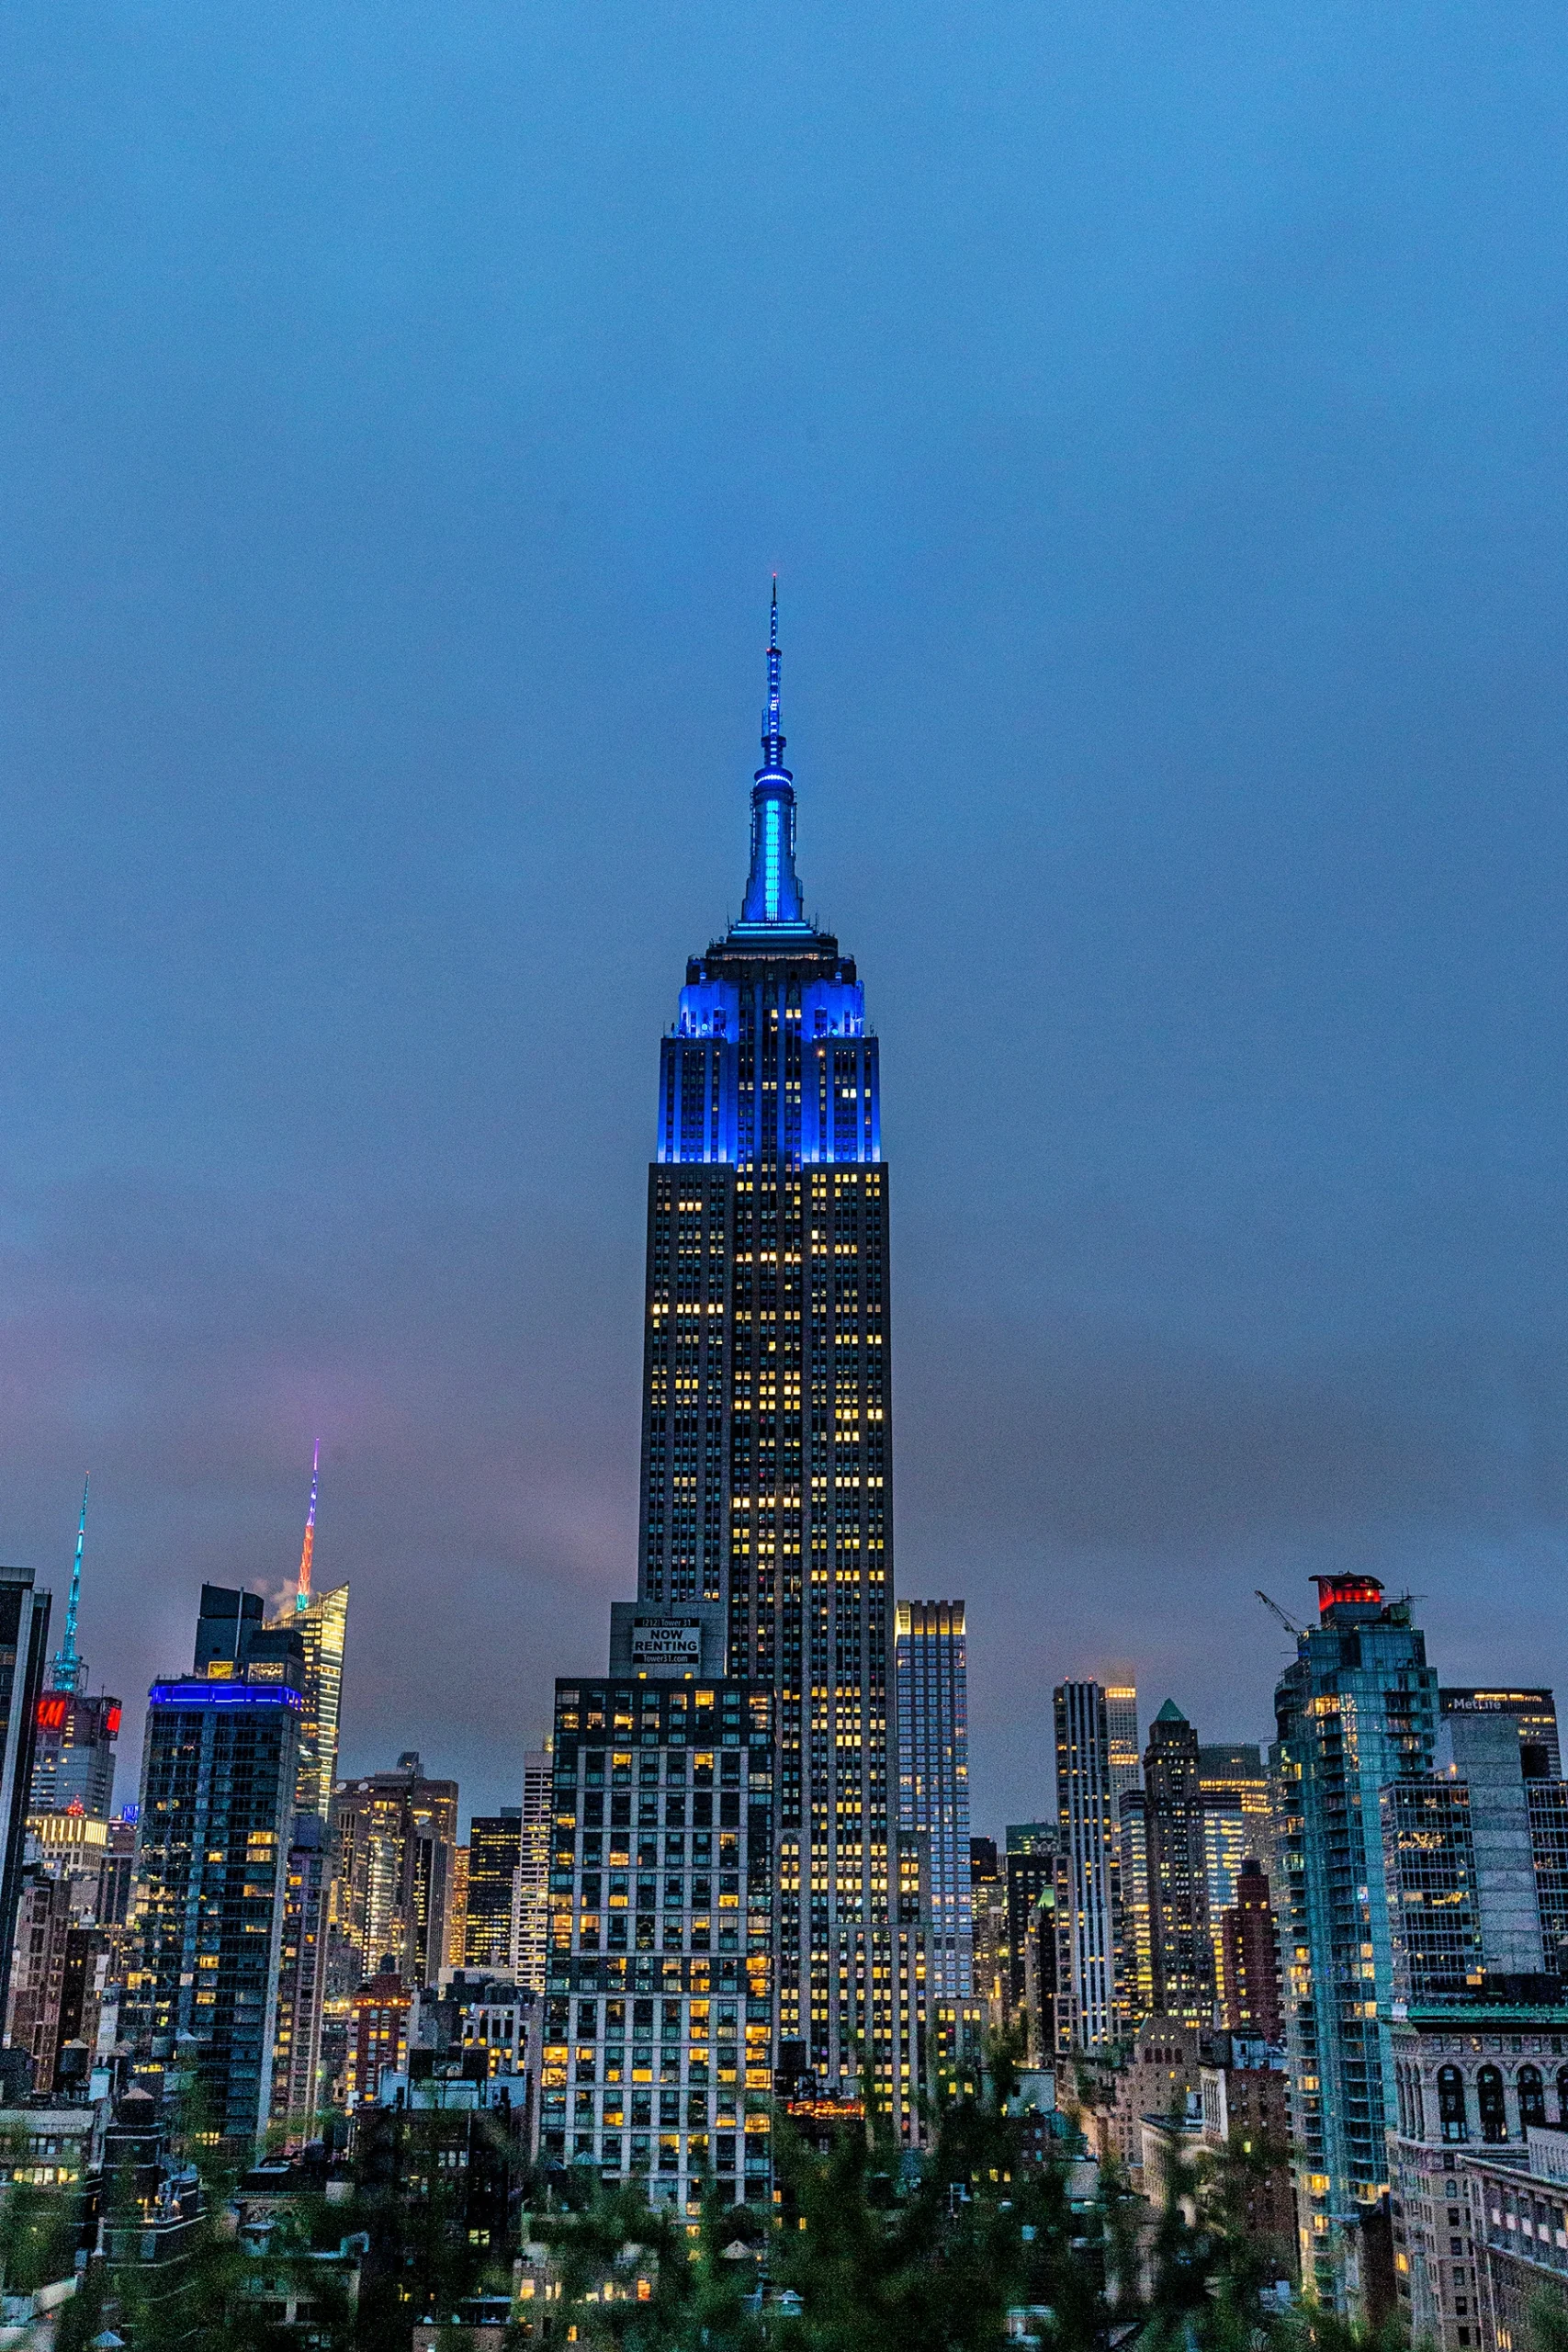 The Empire State Building lit in "Balanchine Blue" in front of an NYC evening skyline.